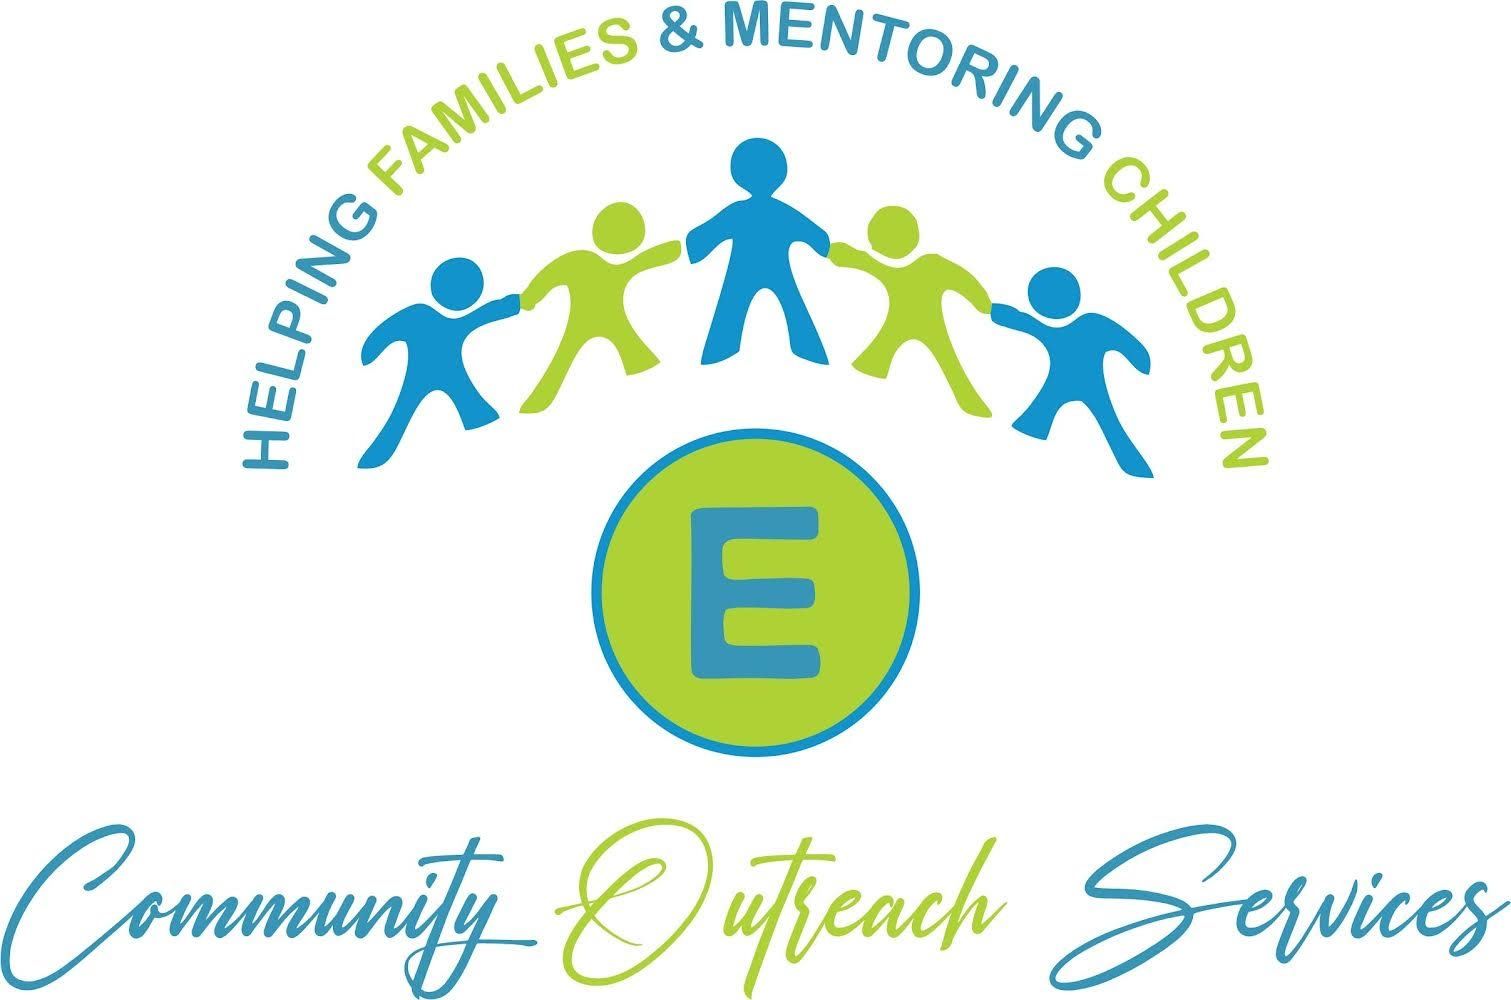 Community Outreach Services is ACV's community partner.